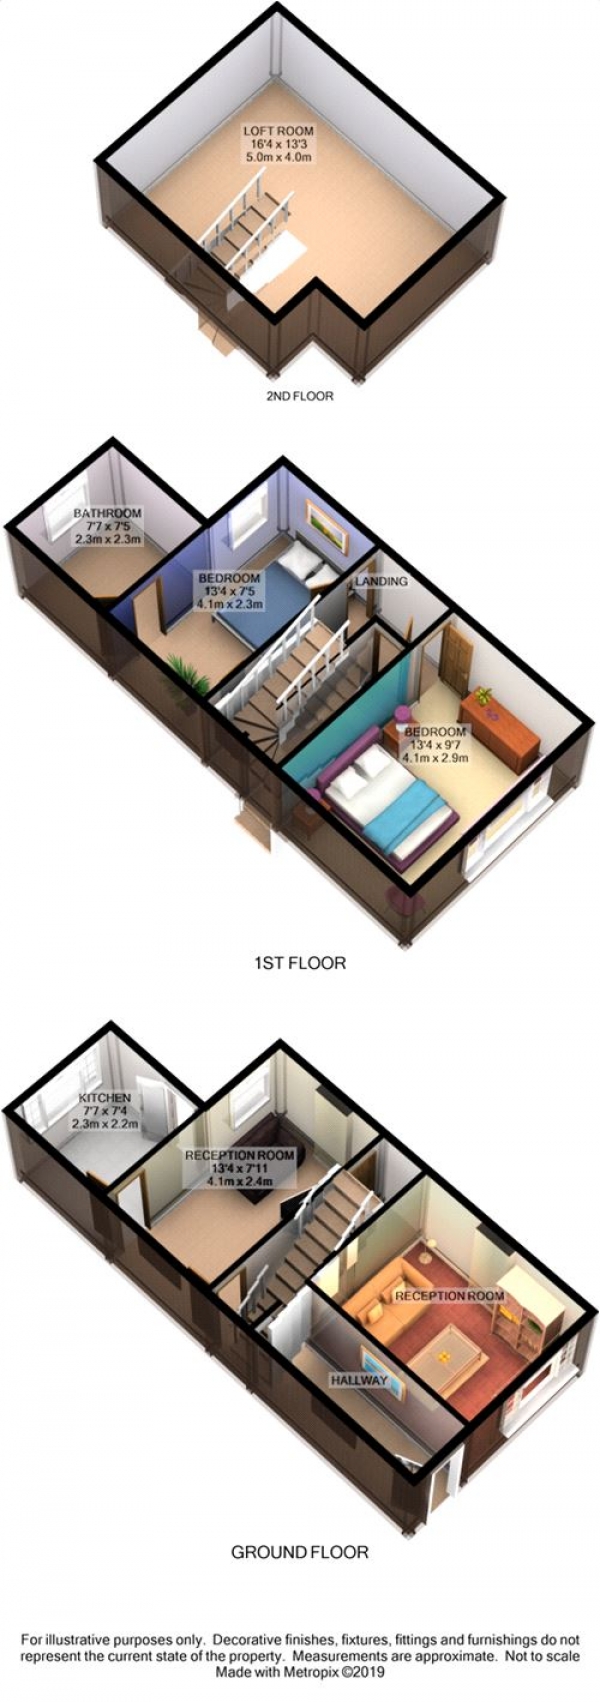 Floor Plan Image for 3 Bedroom Terraced House for Sale in Niagara Street, Heaviley, Stockport, Cheshire